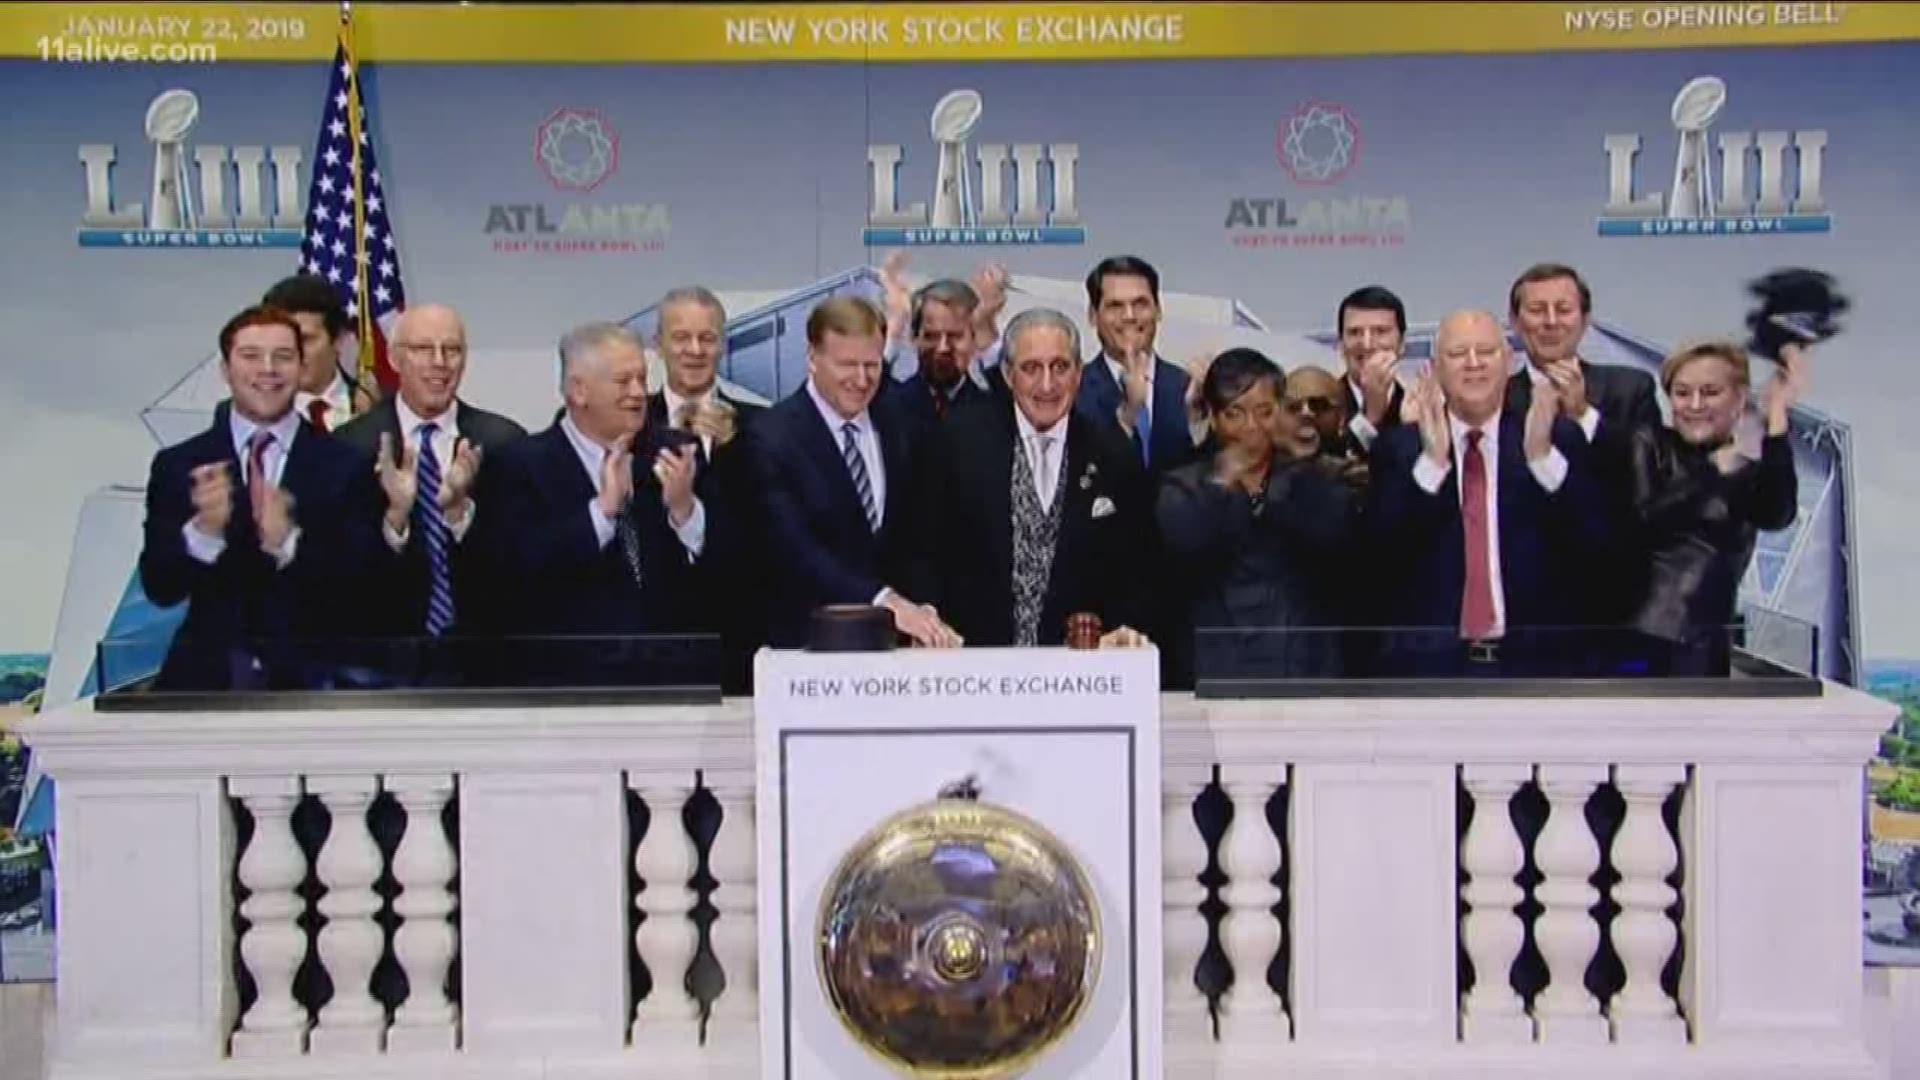 NFL Commissioner Roger Goodell joined Atlanta Falcons owner and chairman Arthur Blank in opening the trading day on the New York Stock Exchange.